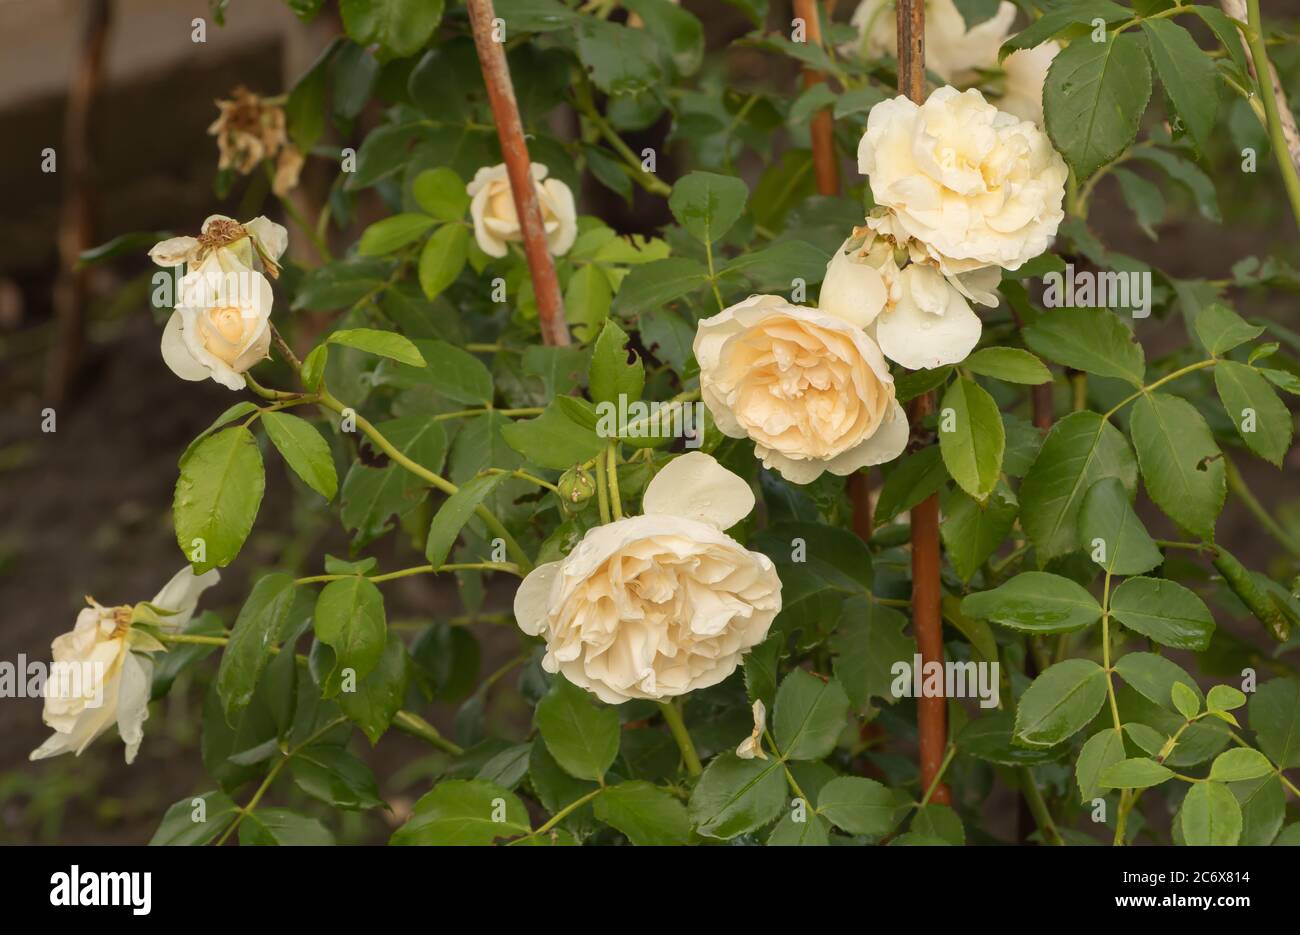 Rose in bloom with creamy-white flowers fragrant Stock Photo - Alamy